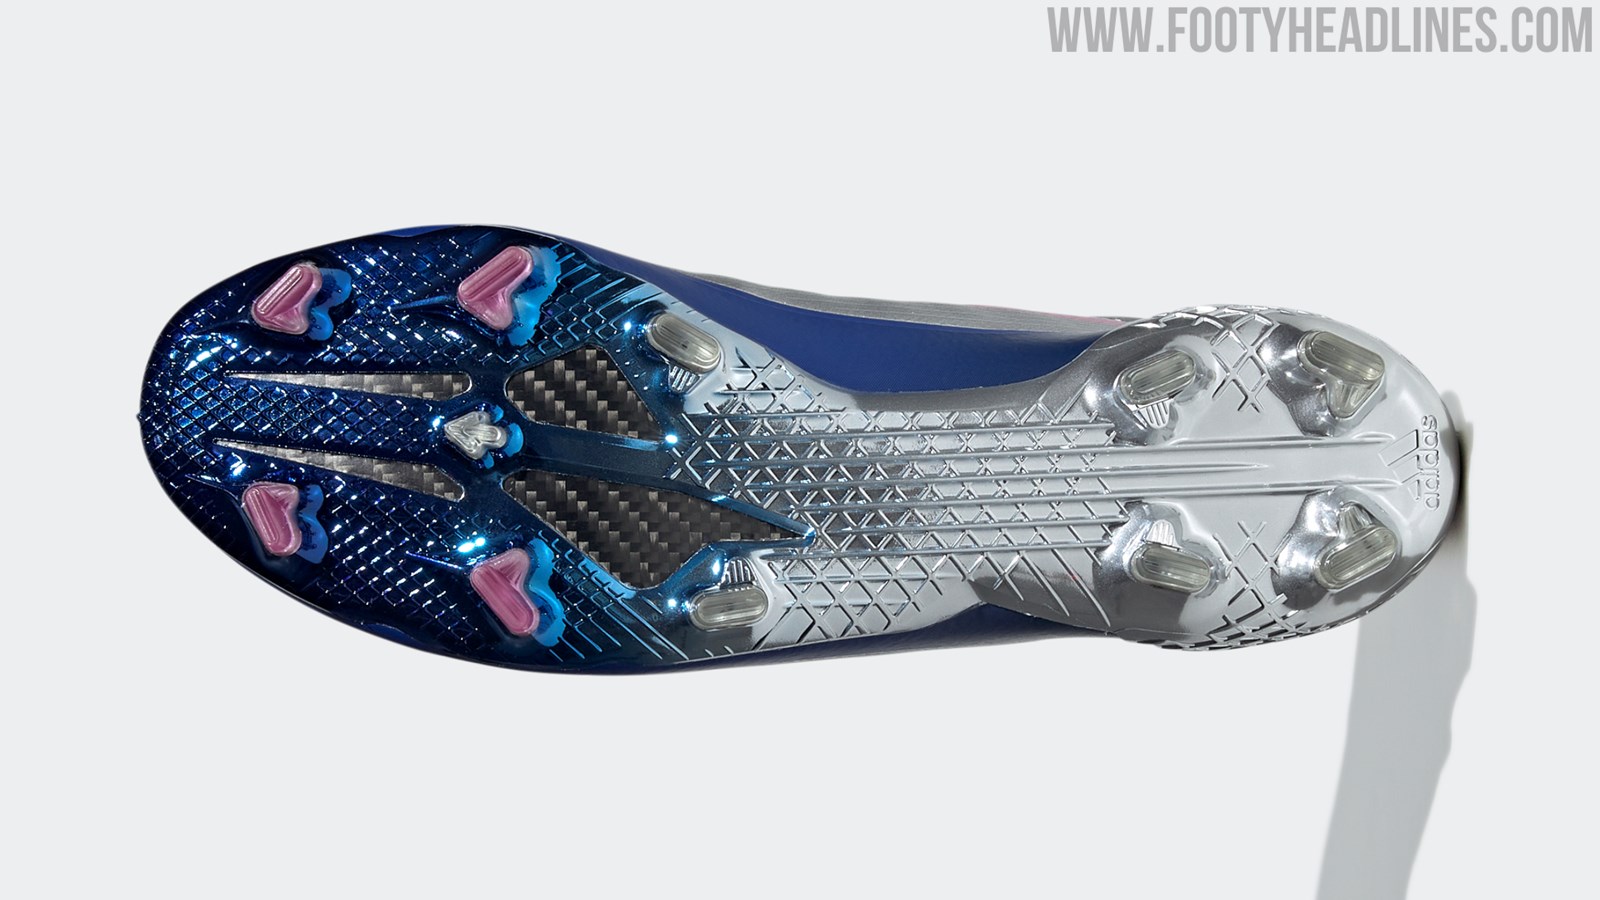 Adidas F50 Ghosted Champions League Boots Released - Footy Headlines